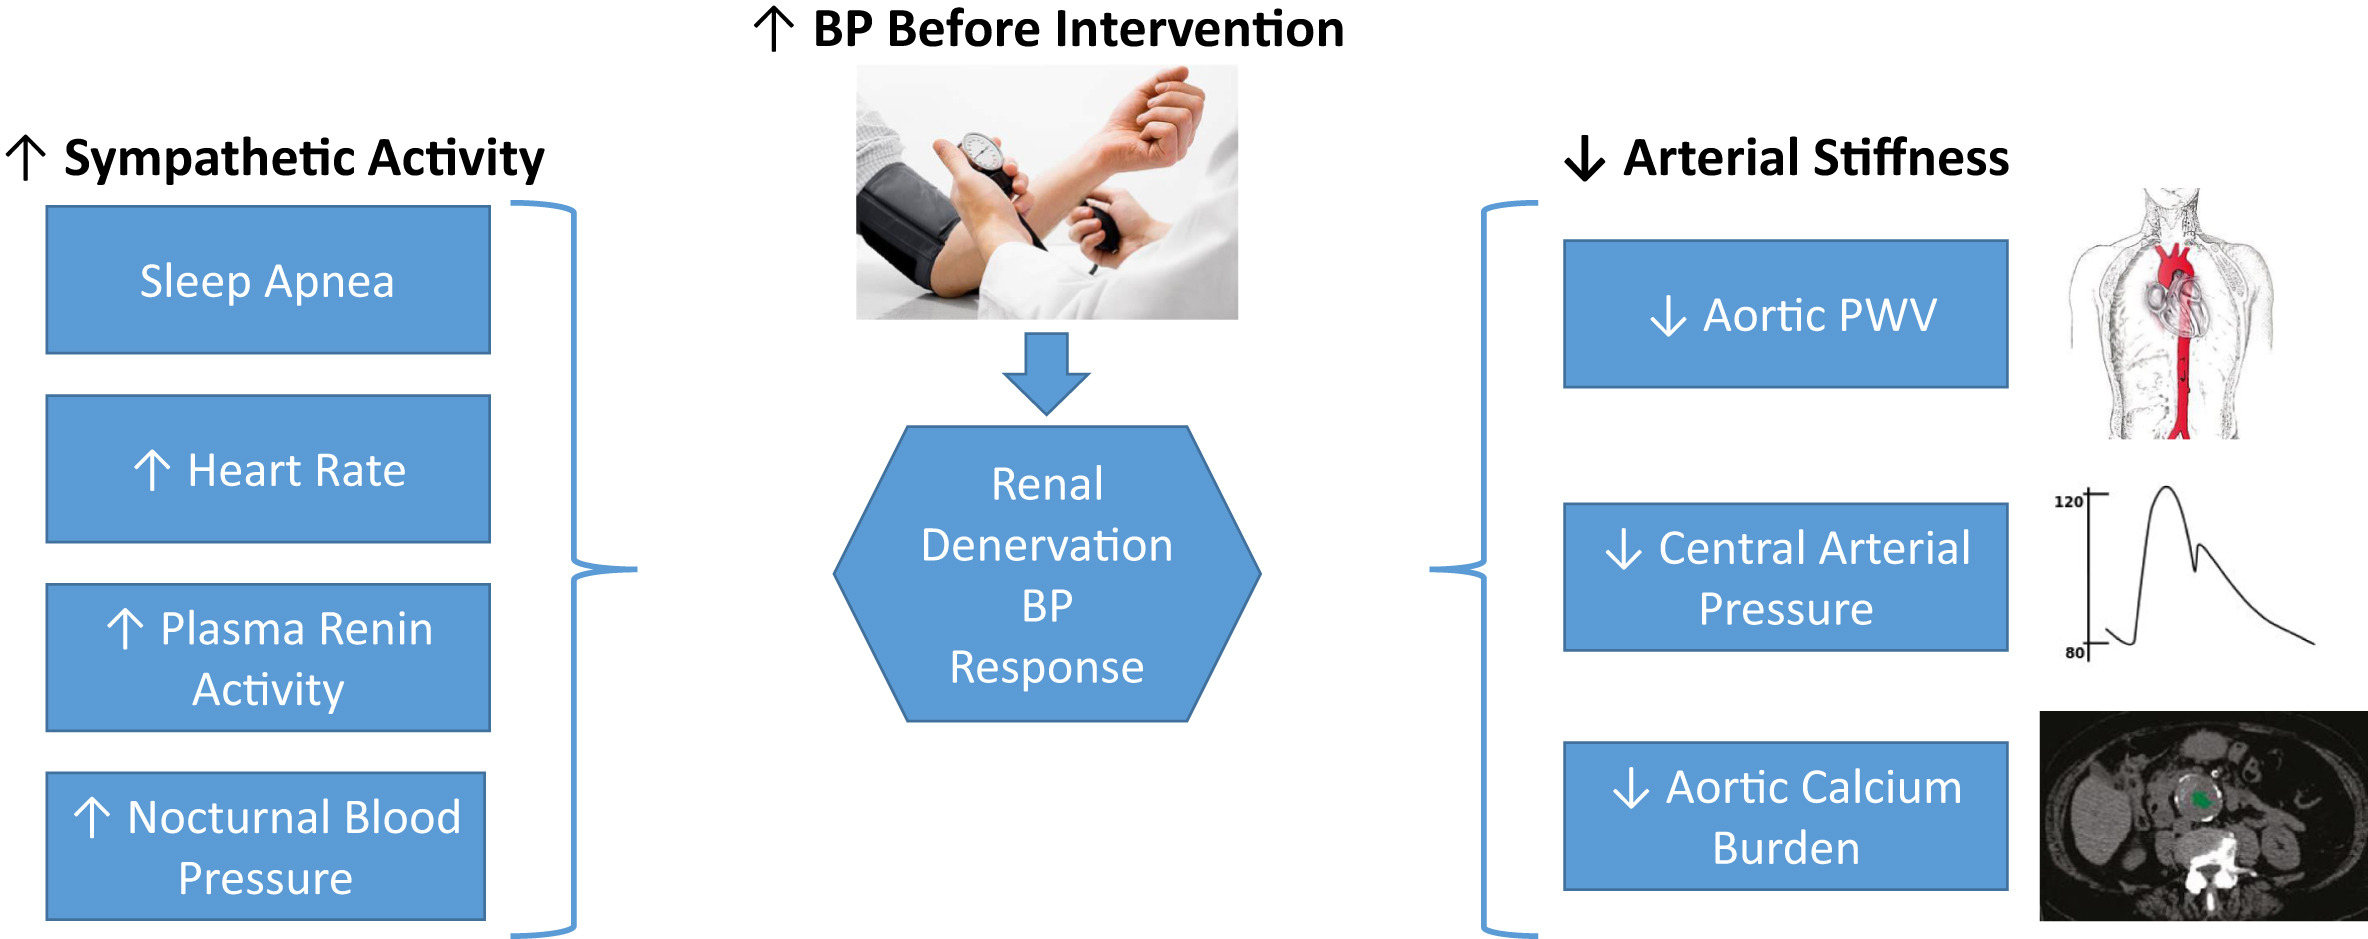 Renal Denervation: Are We There Yet?